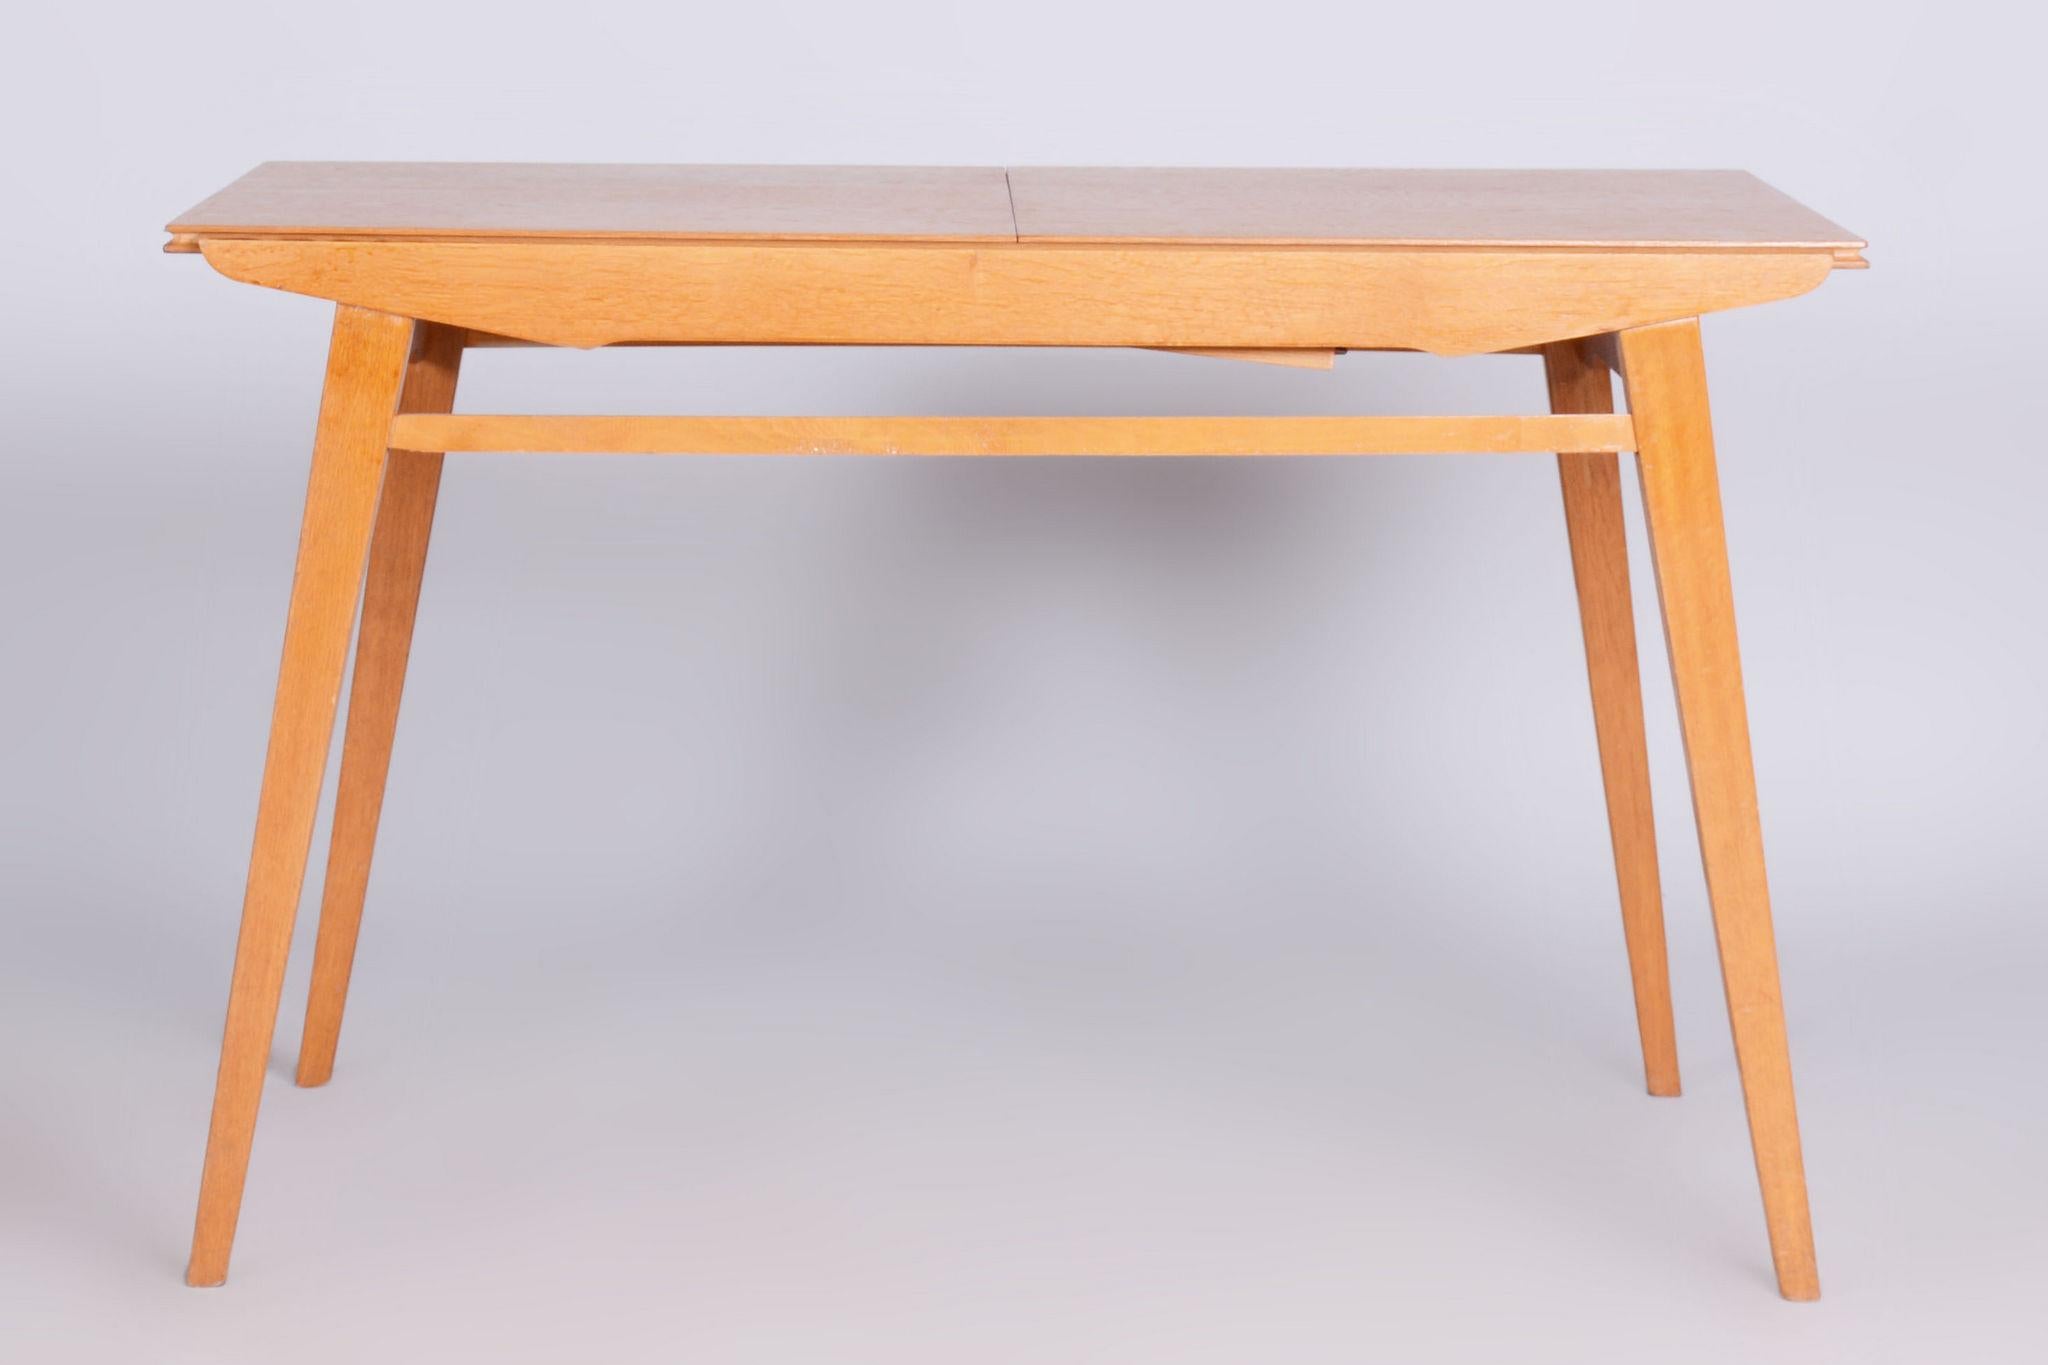 Restored Midcentury Oak Extendable Dining Table, Revived Polish, Czechia, 1950s For Sale 7